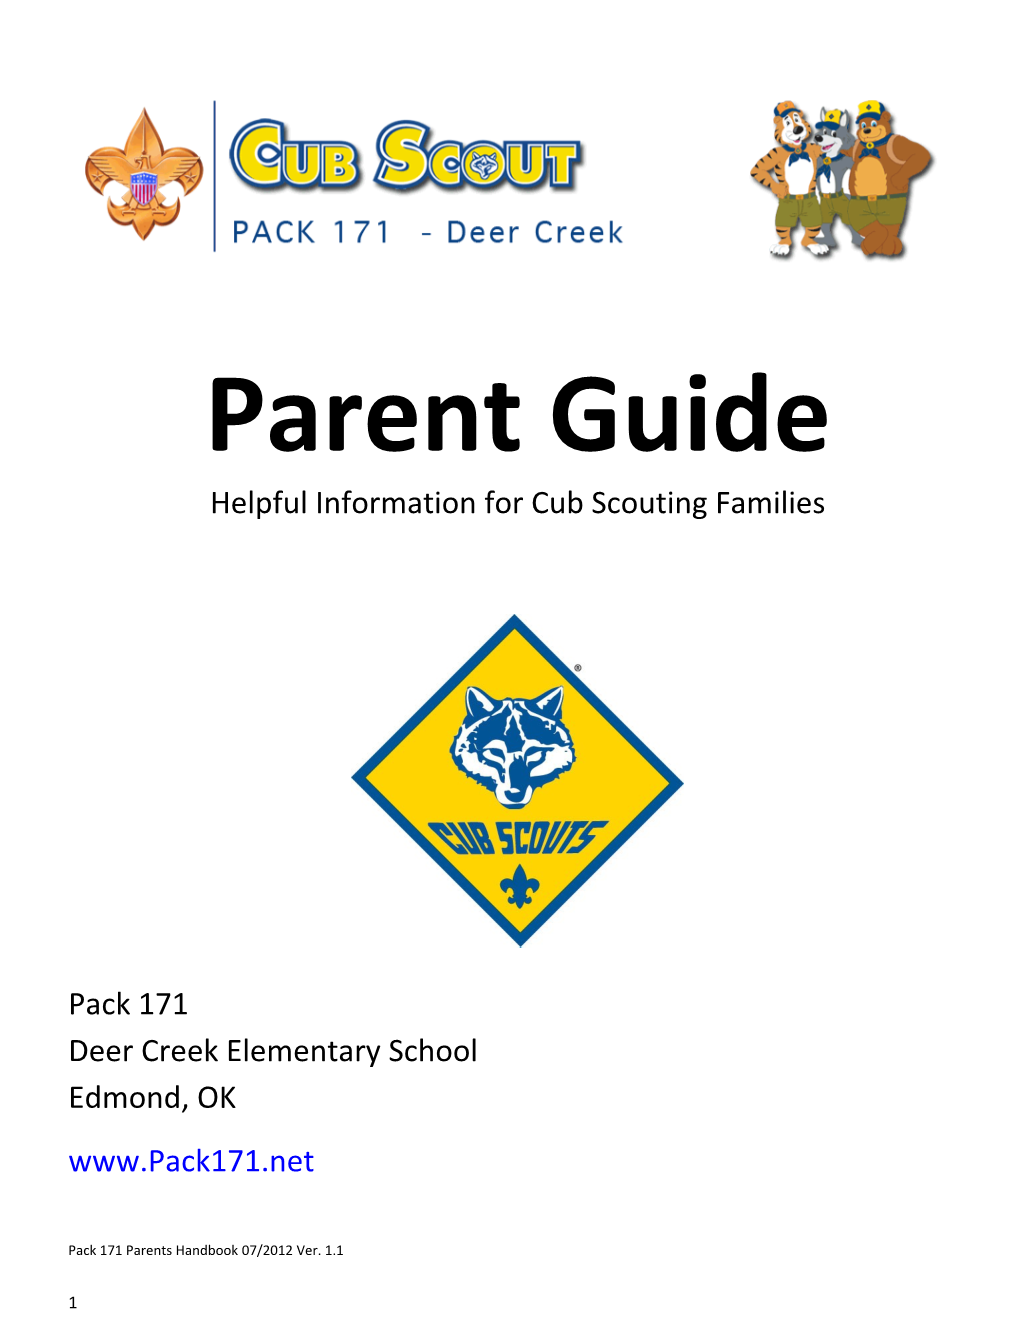 Helpful Information for Cub Scouting Families